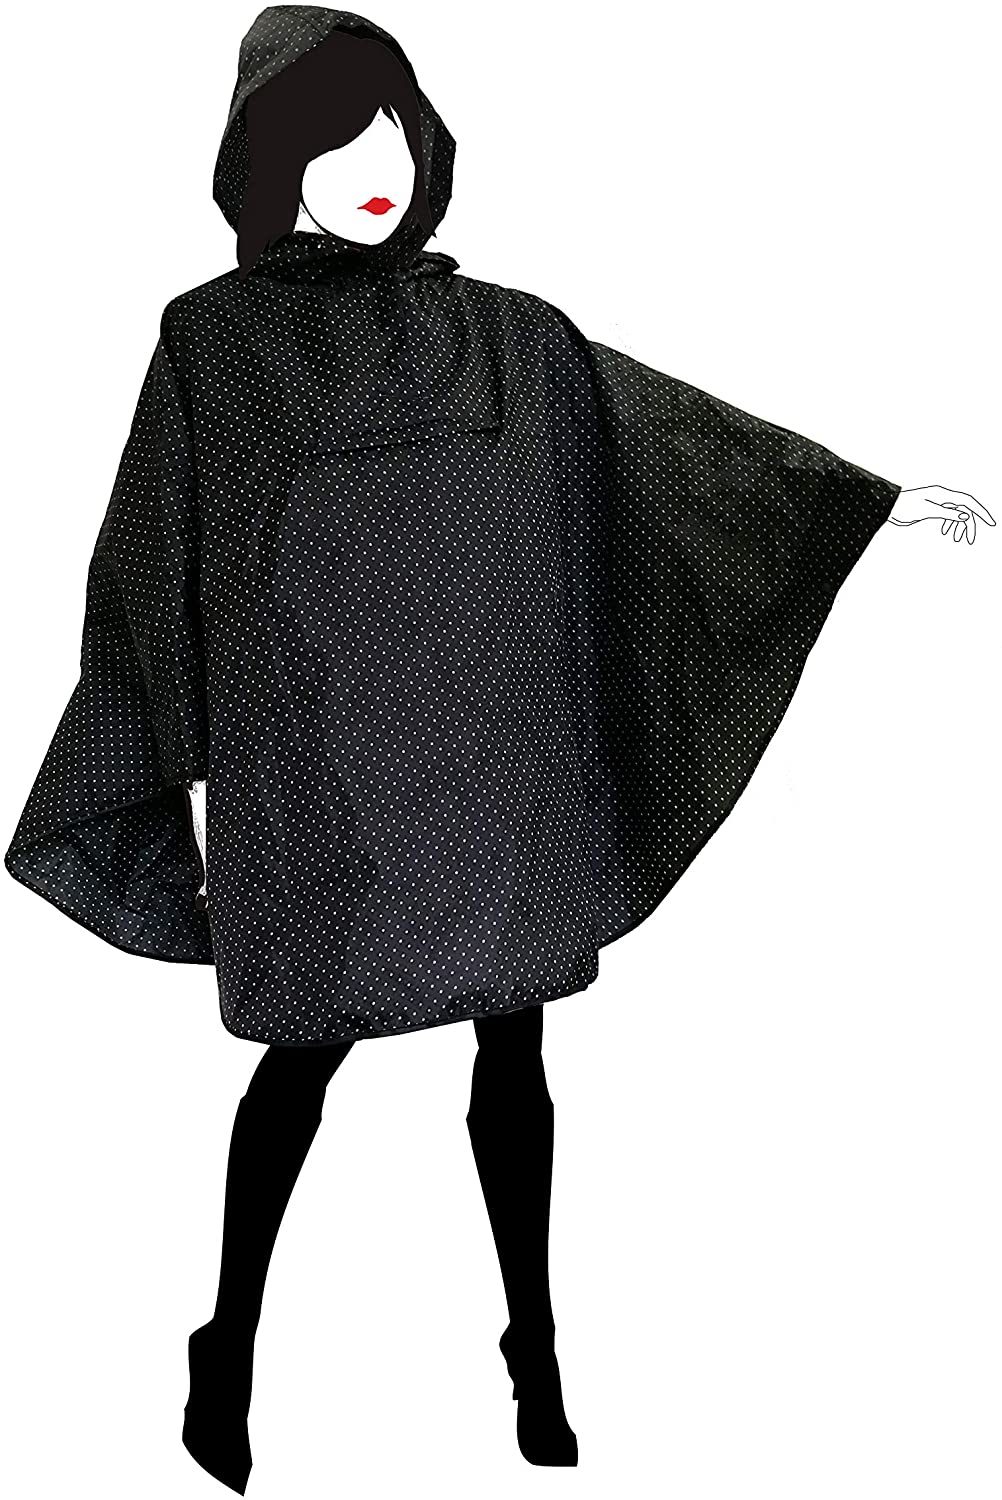 Rain Poncho with Hood for Women, Highly Resistant and Waterproof Material for Outdoor Activities